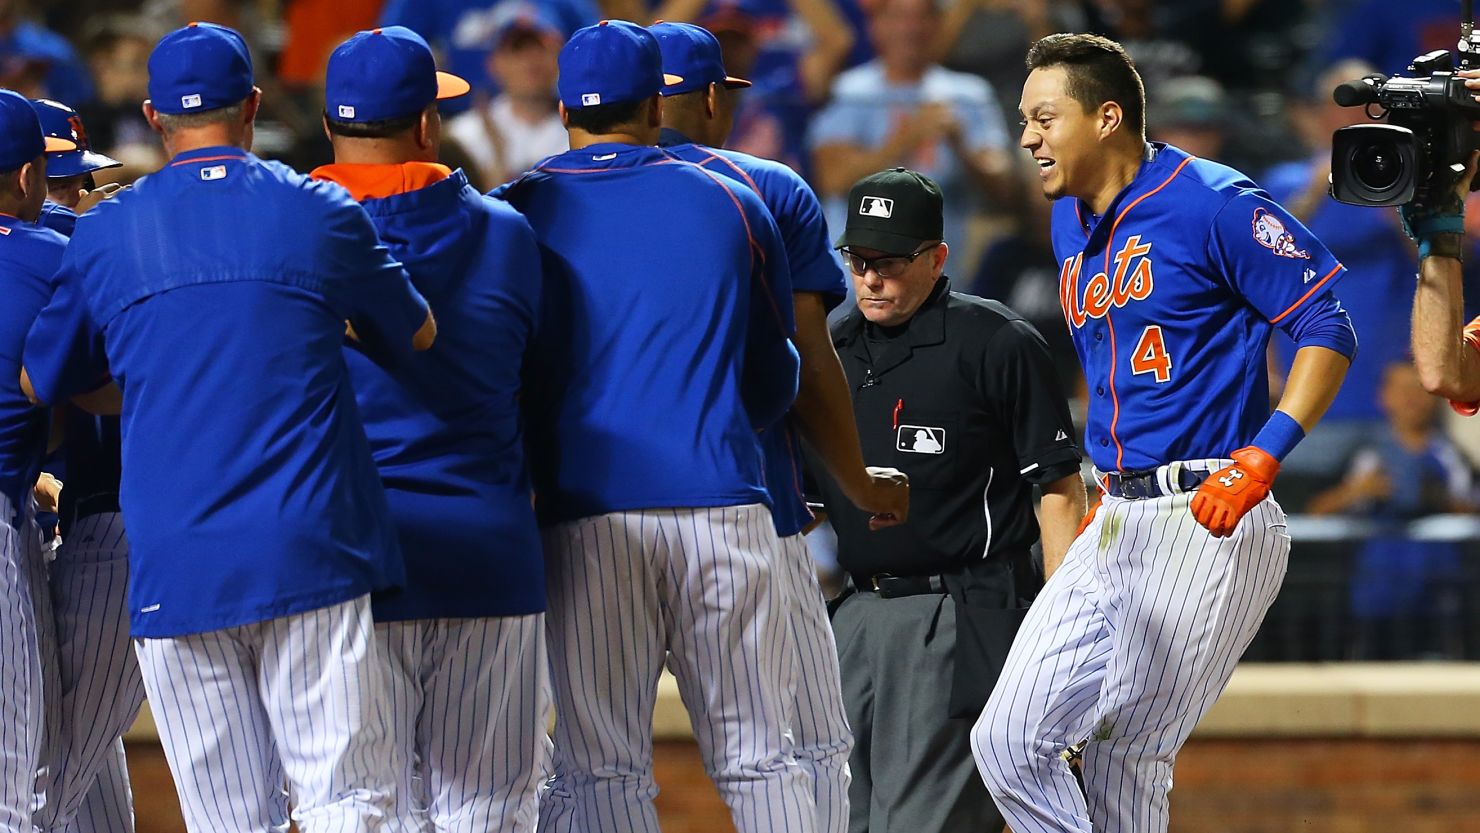 Wilmer Flores, right, of the New York Mets celebrates after hitting a home run in the 12th inning. 